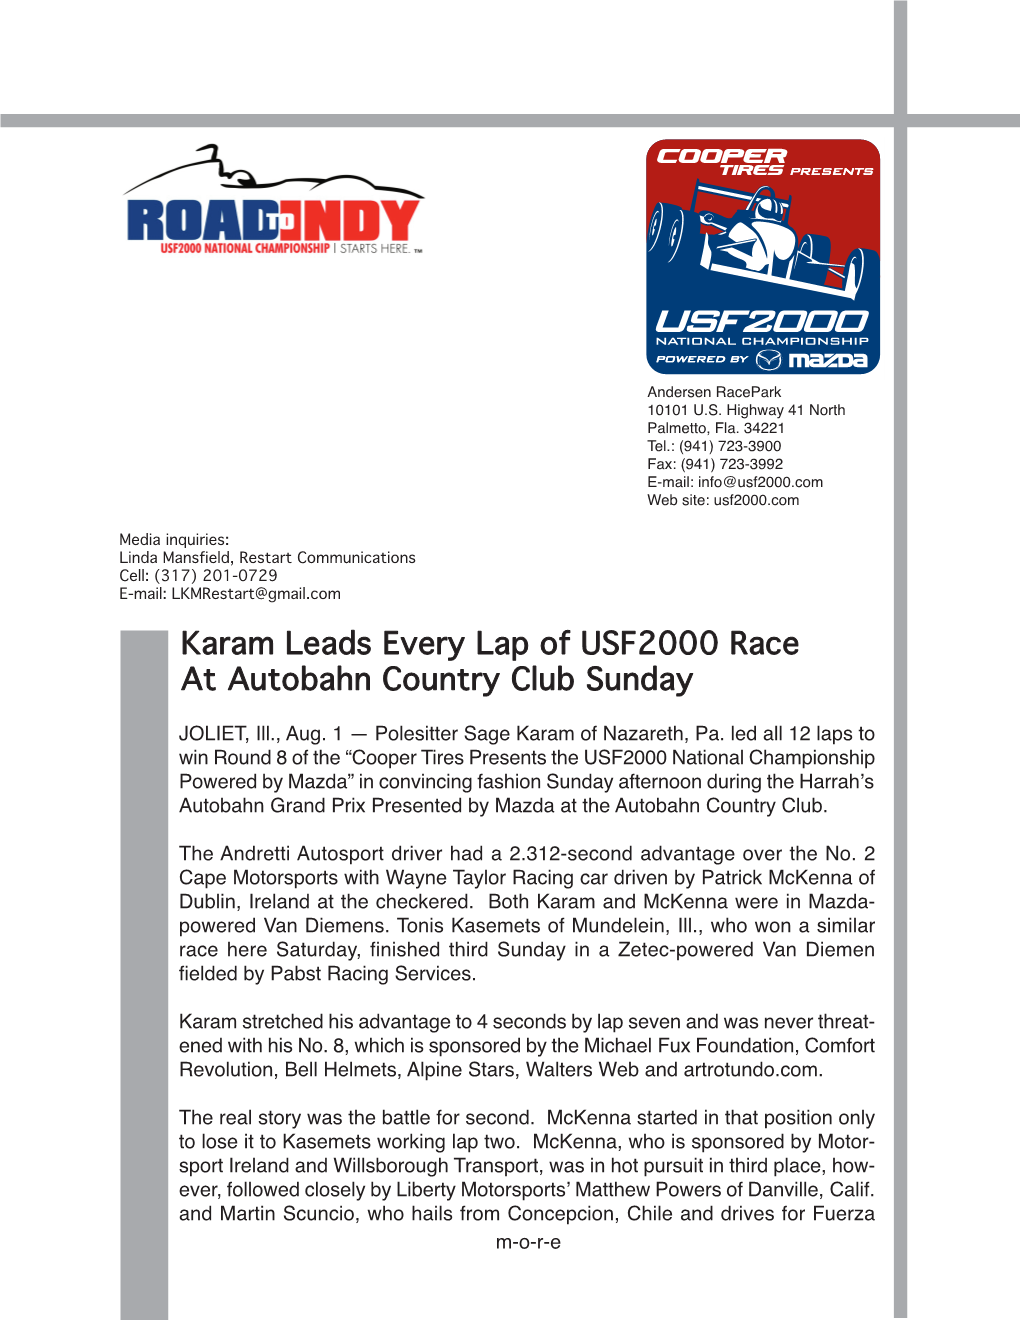 Karam Leads Every Lap of USF2000 Race at Autobahn Country Club Sunday